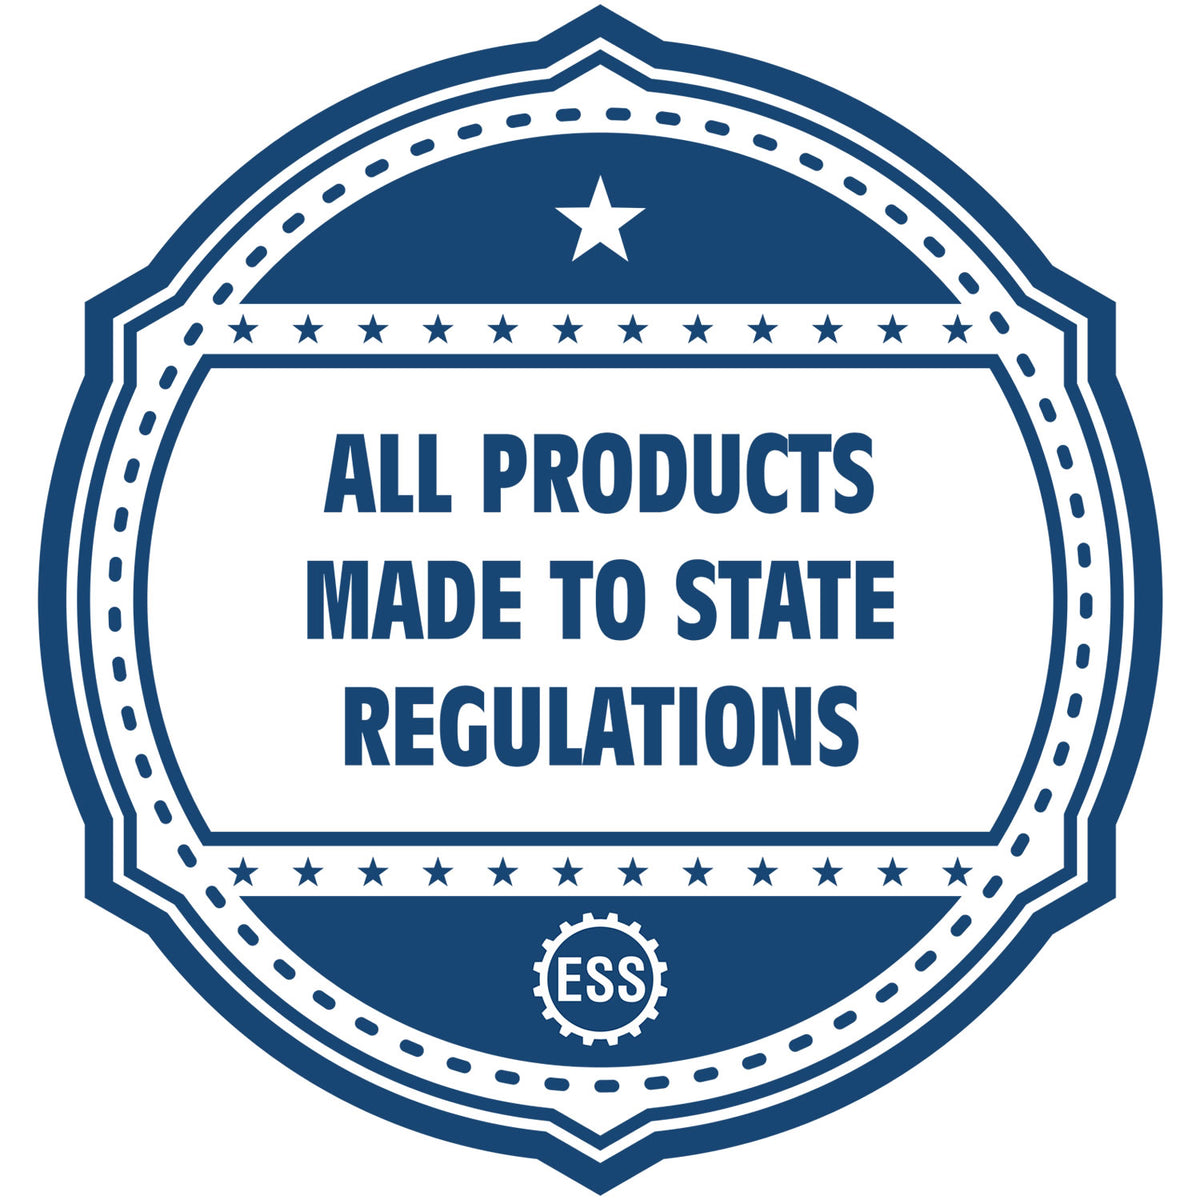 An icon or badge element for the State of Iowa Long Reach Architectural Embossing Seal showing that this product is made in compliance with state regulations.